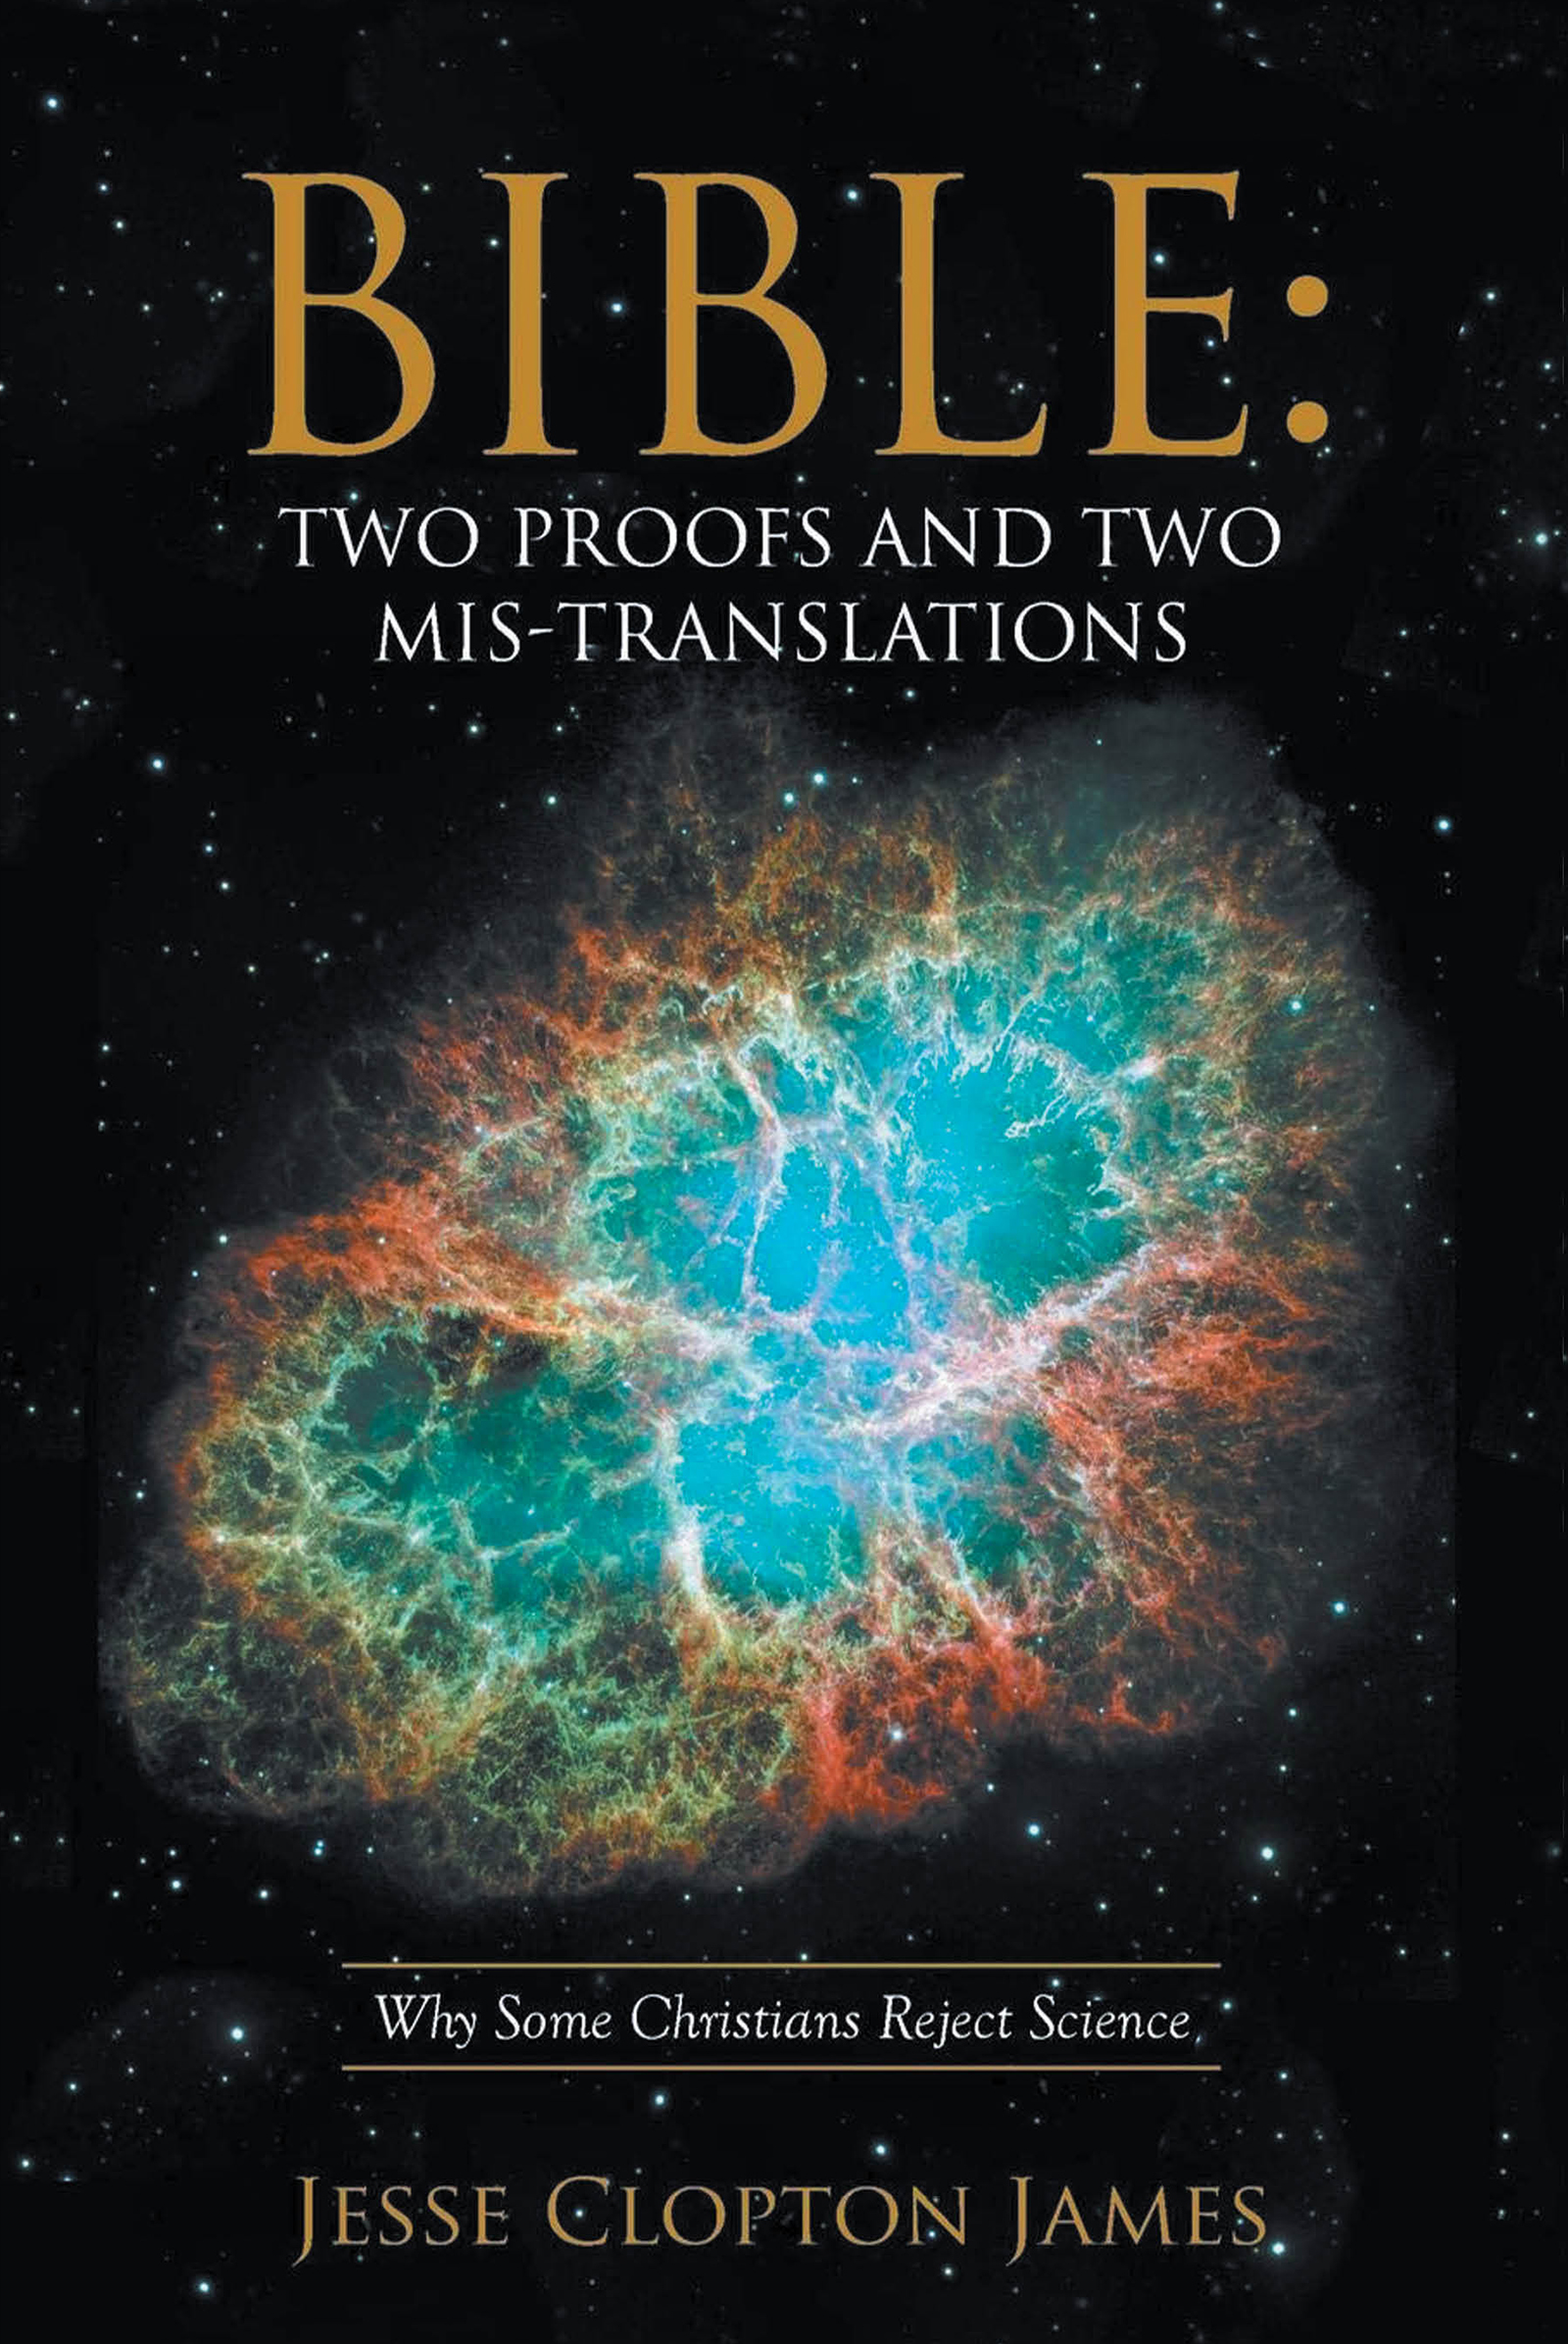 Bible: Two Proofs and Two Mis-Translations by Jesse Clopton James